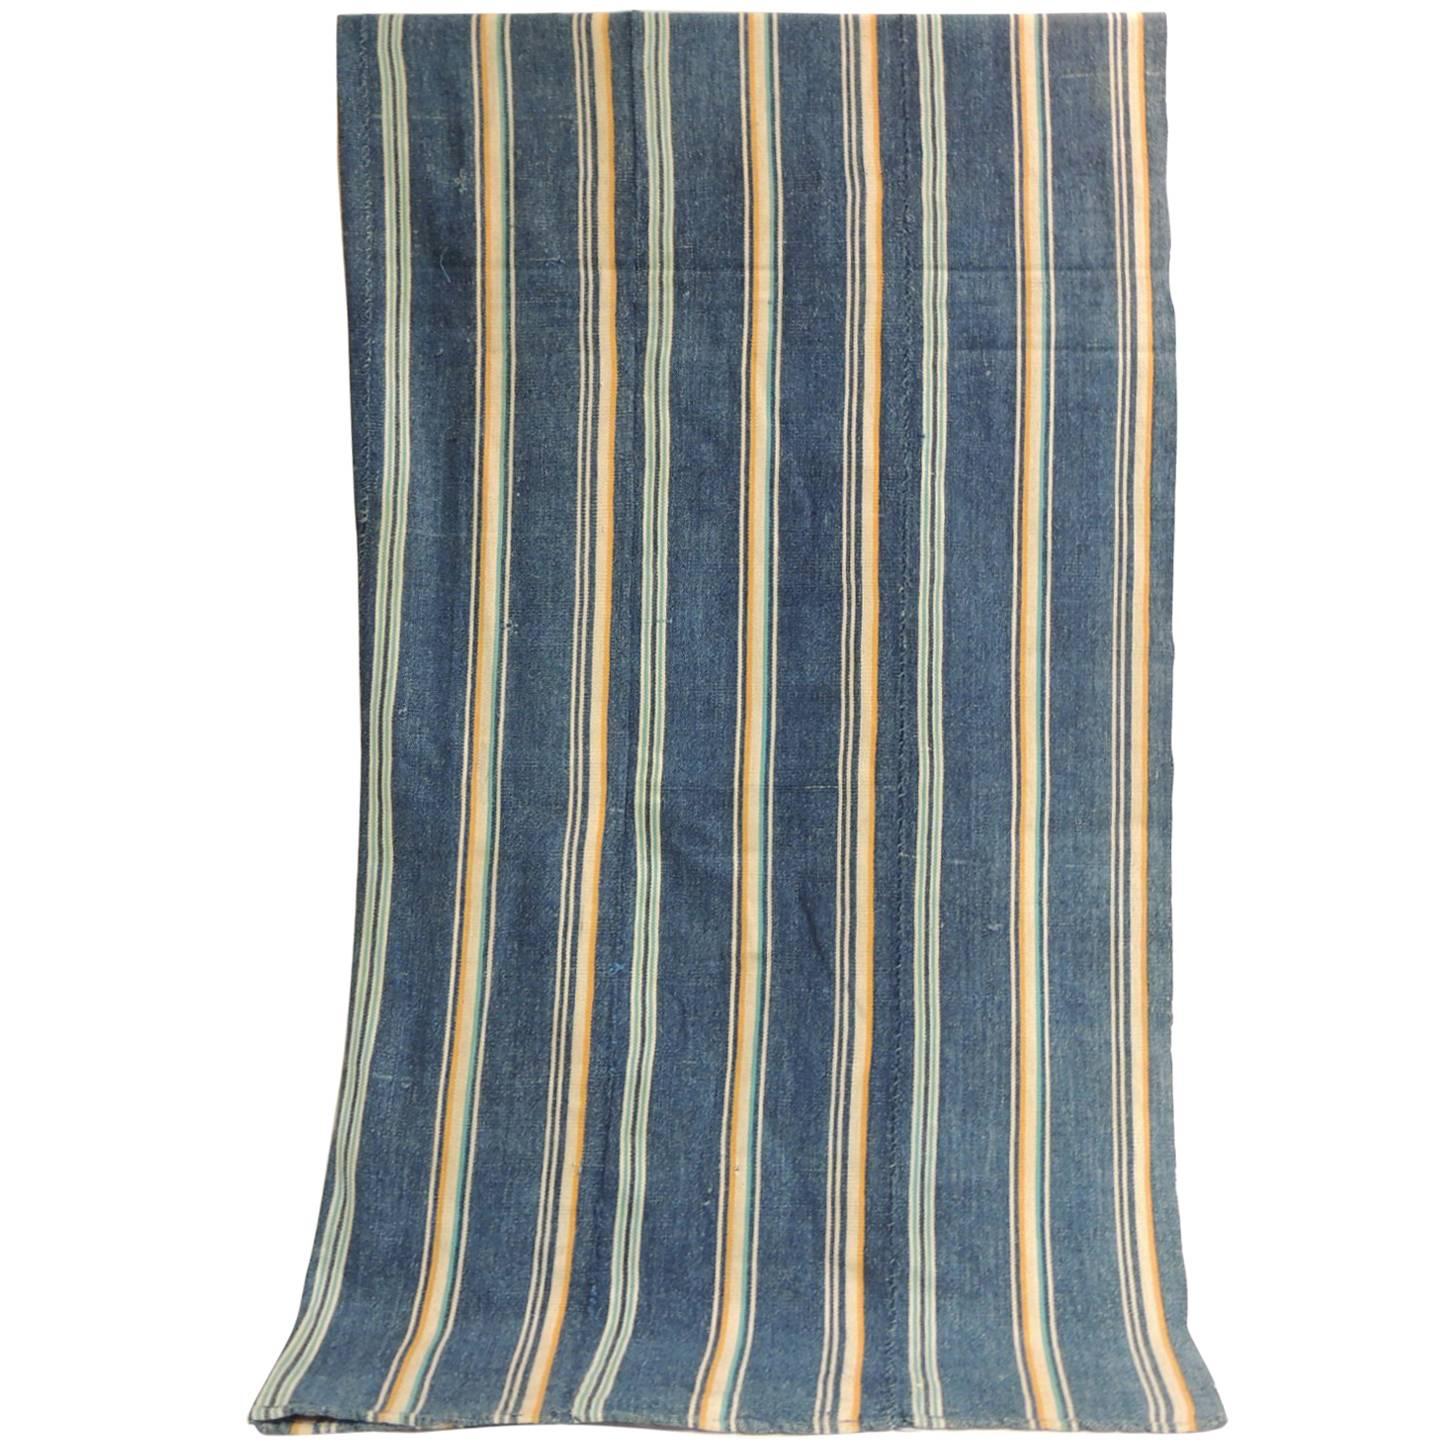 Vintage Yoruba and Baulé warp ikat artisanal cloth. West Africa vintage Yoruba and Baulé warp ikat. In shades of blue, natural, aqua and yellow.
Ikat is the process whereby threads are tie-dyed before weaving takes place. When the cloth is woven,